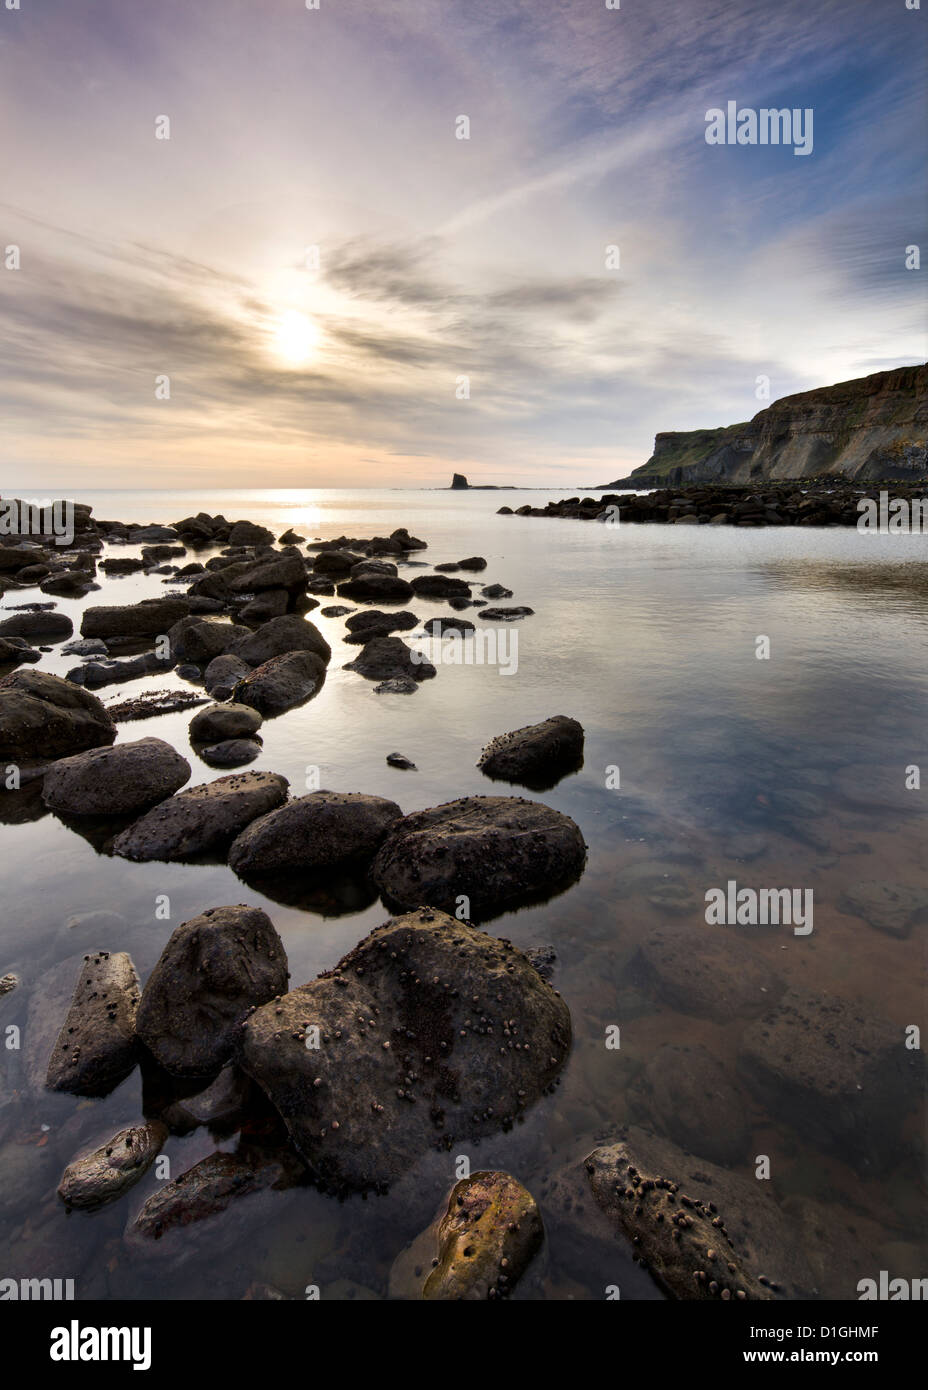 Incoming tide and clouds at Saltwick Bay, North Yorkshire, Yorkshire, England, United Kingdom, Europe Stock Photo